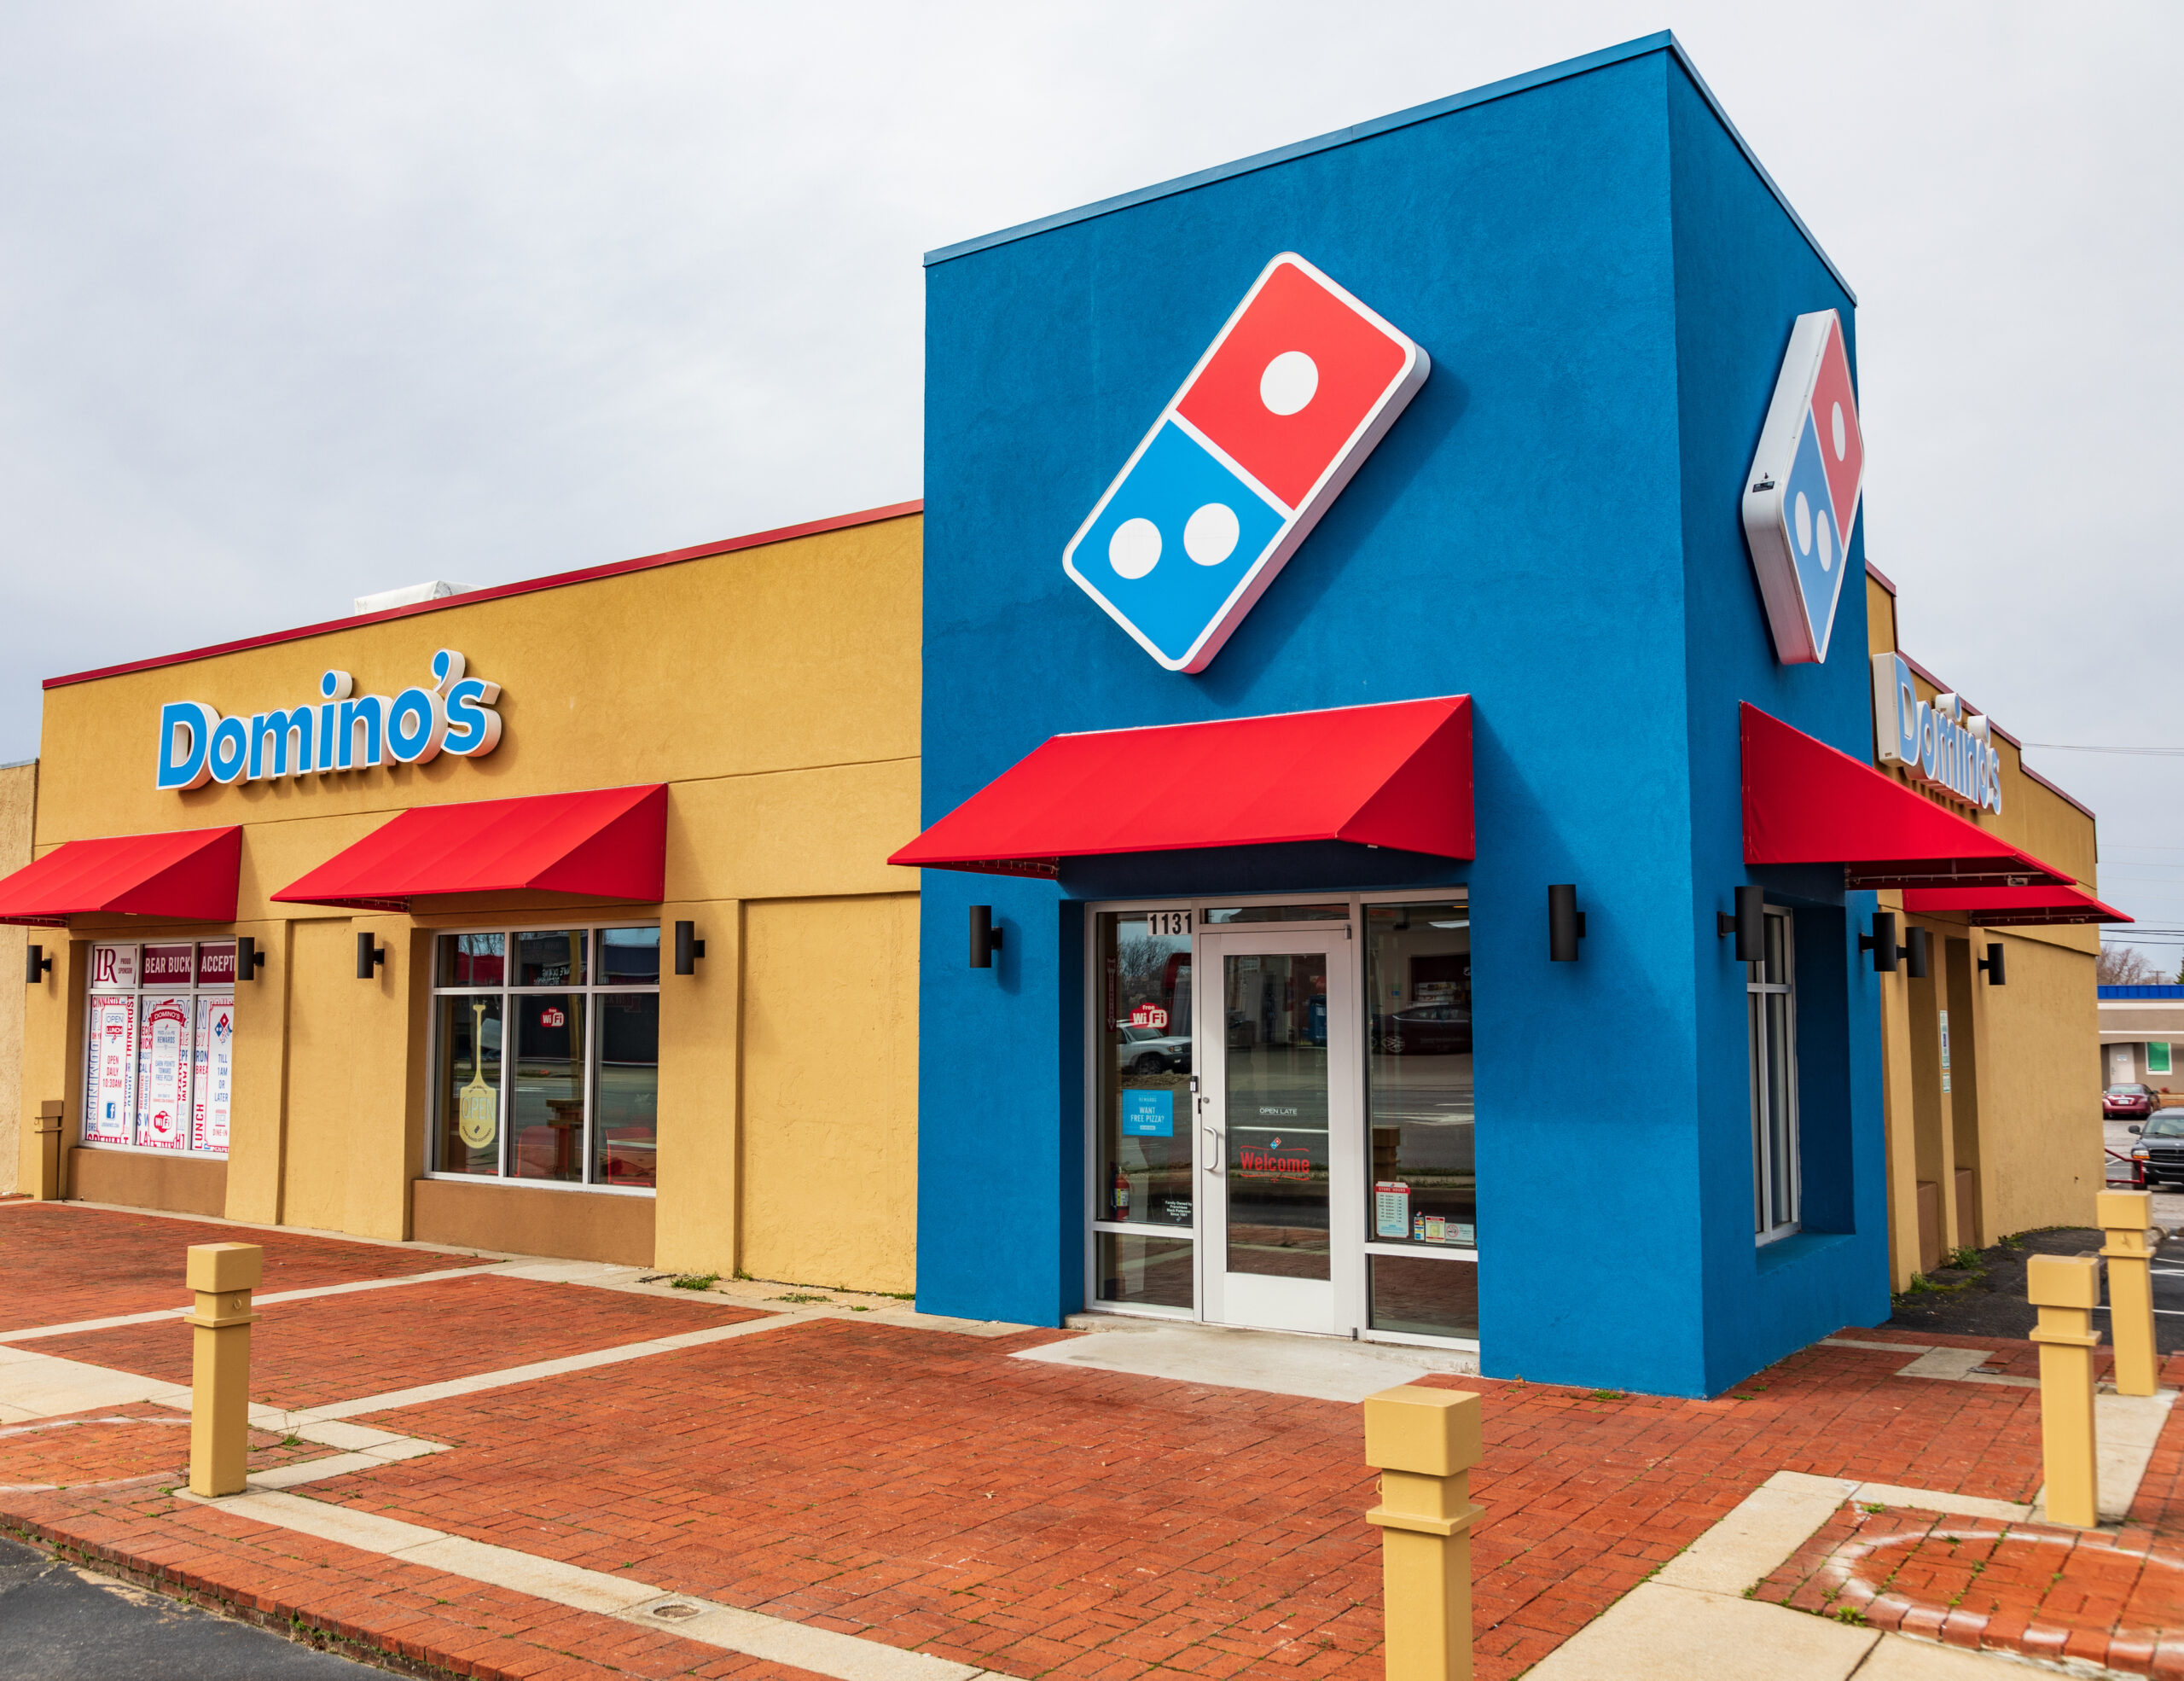 AI and Automation Could Mean Big Dough for Domino’s